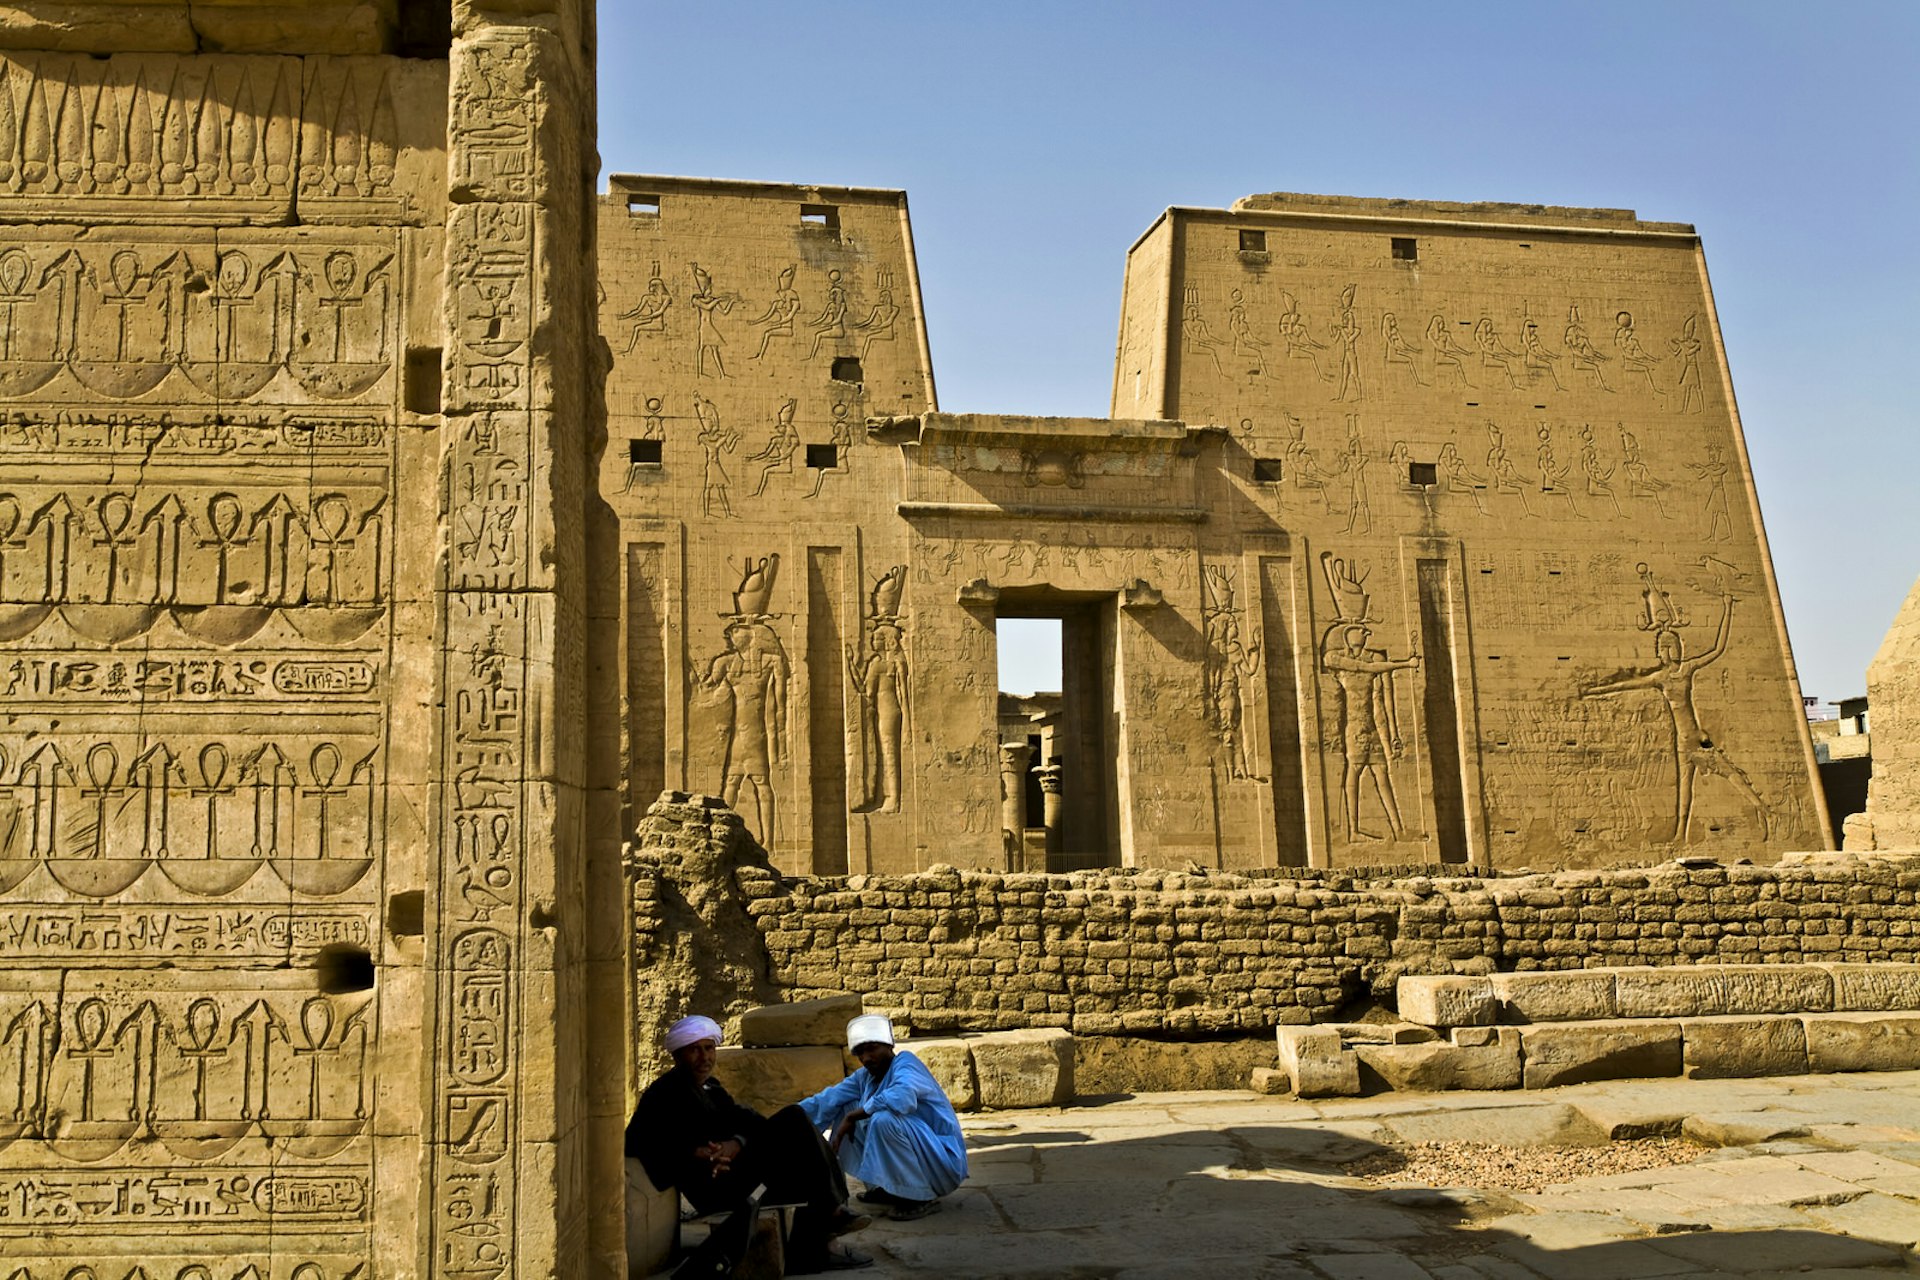 Temple of Edfu. Image by Luis Davilla / Getty Images